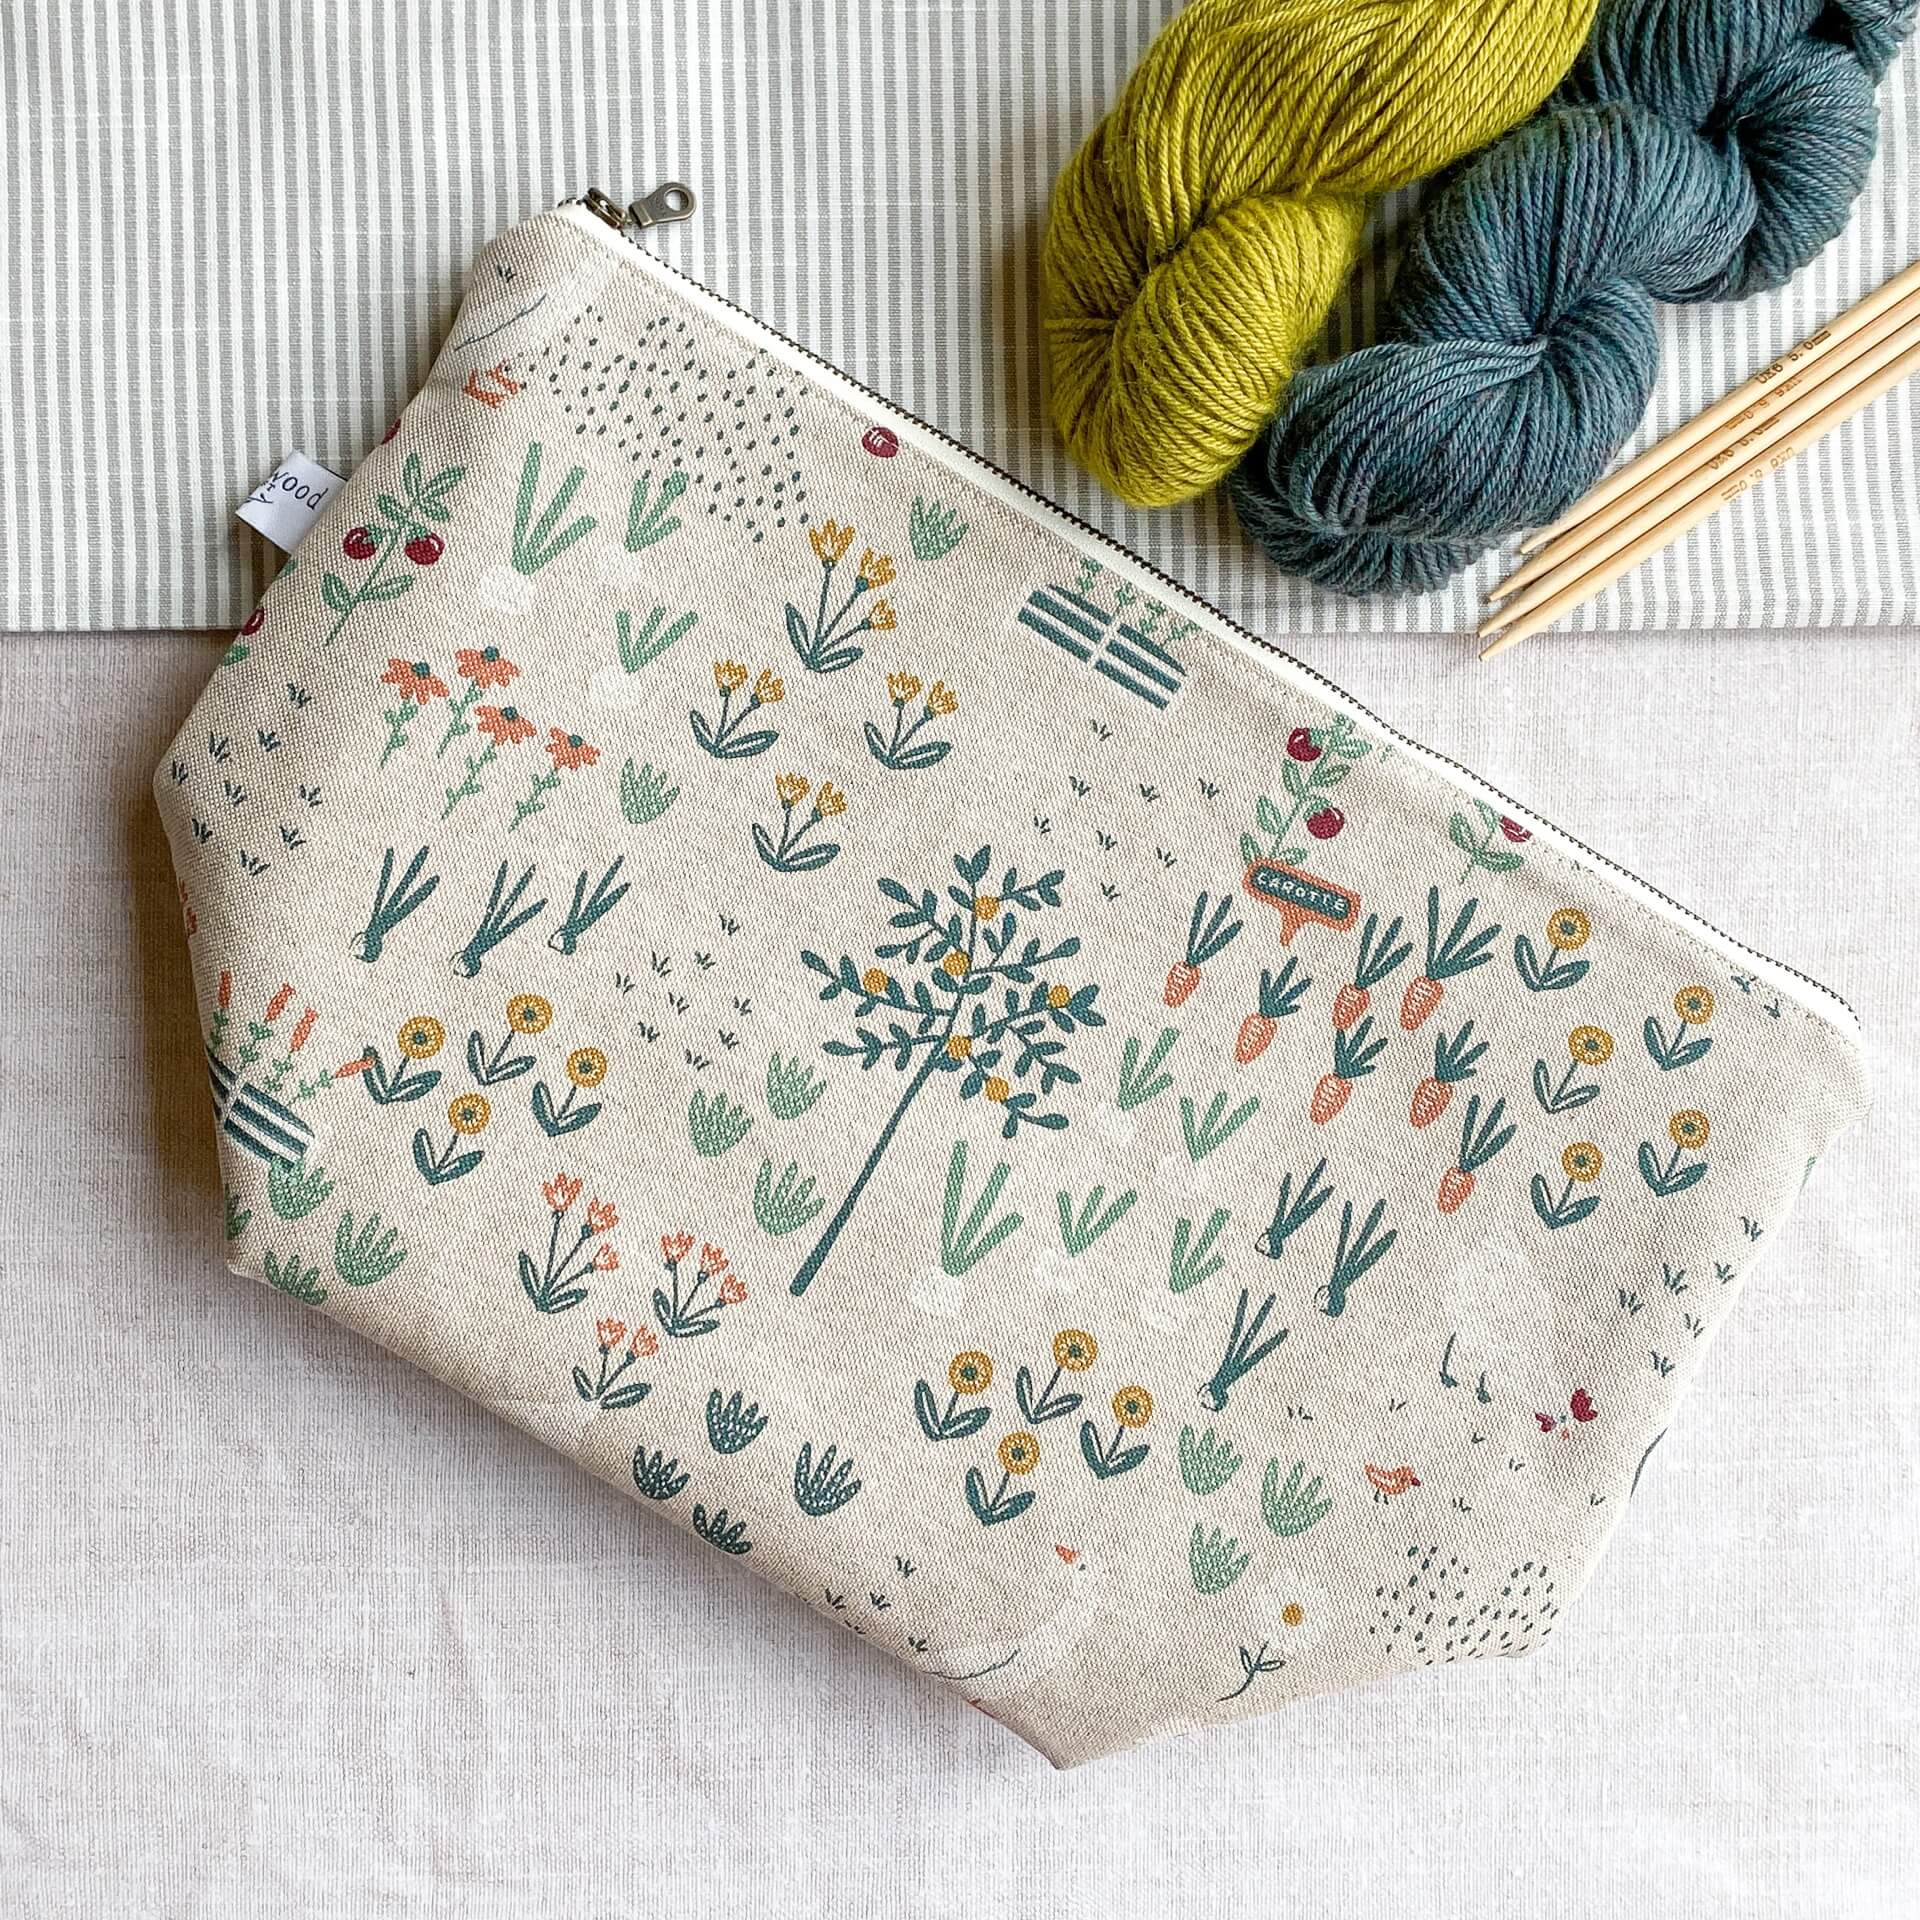 A zippered project bag for knitting lies on a linen covered table top next to two skeins of yarn - one green and one blue - and some wooden knitting needles. 